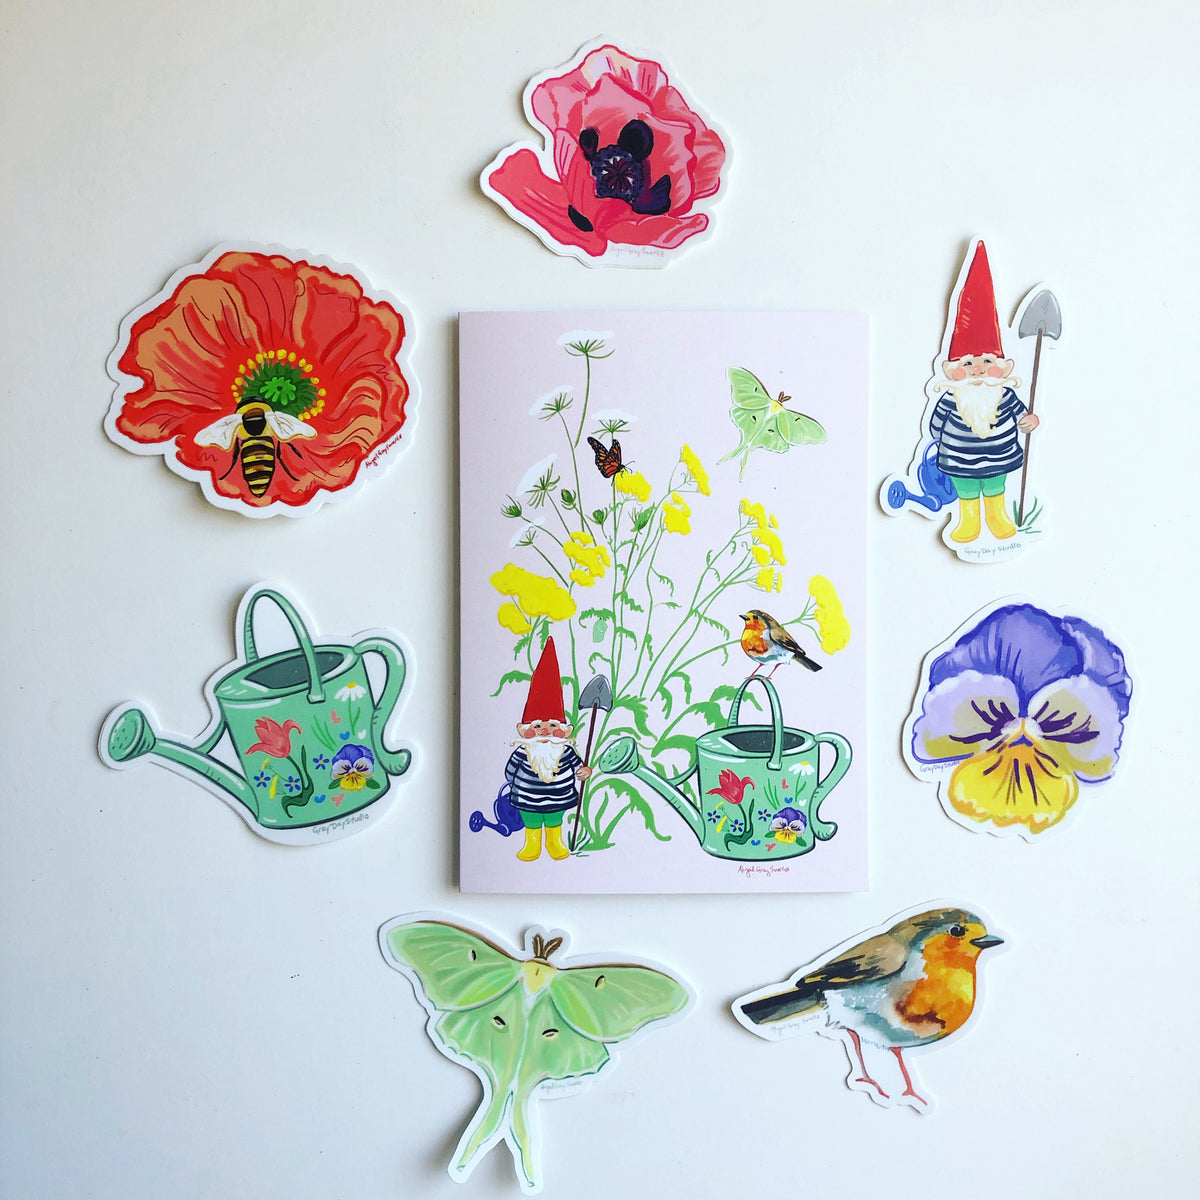 garden party themed collection of cards and stickers. made in Maine by Abigail Gray Swartz